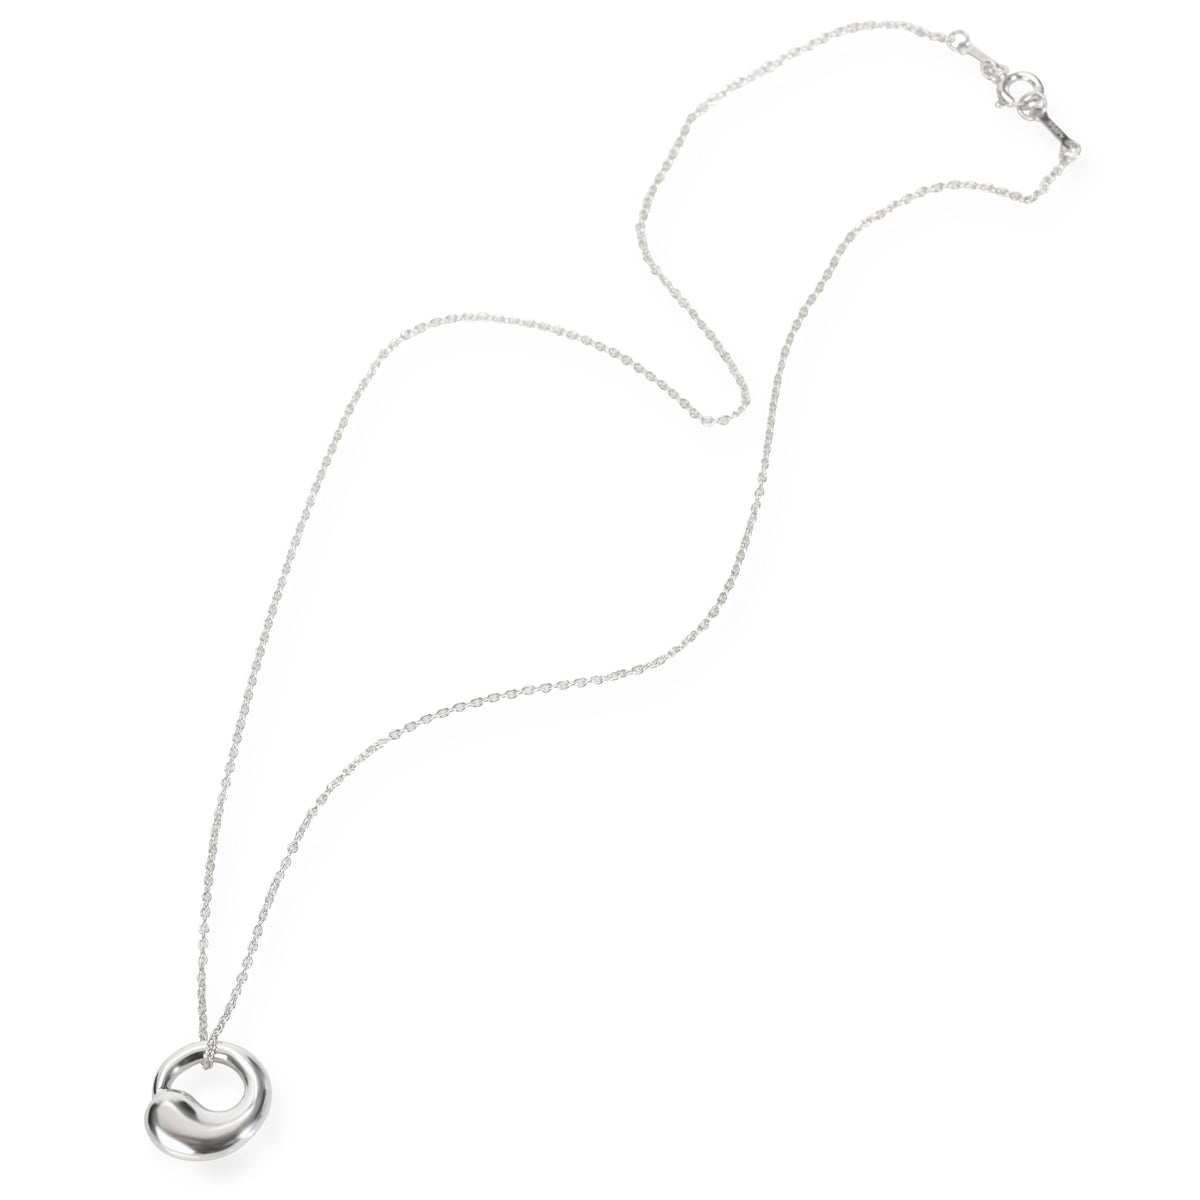 Tiffany & Co. Elsa Peretti Eternal Circle Necklace in Sterling Silver